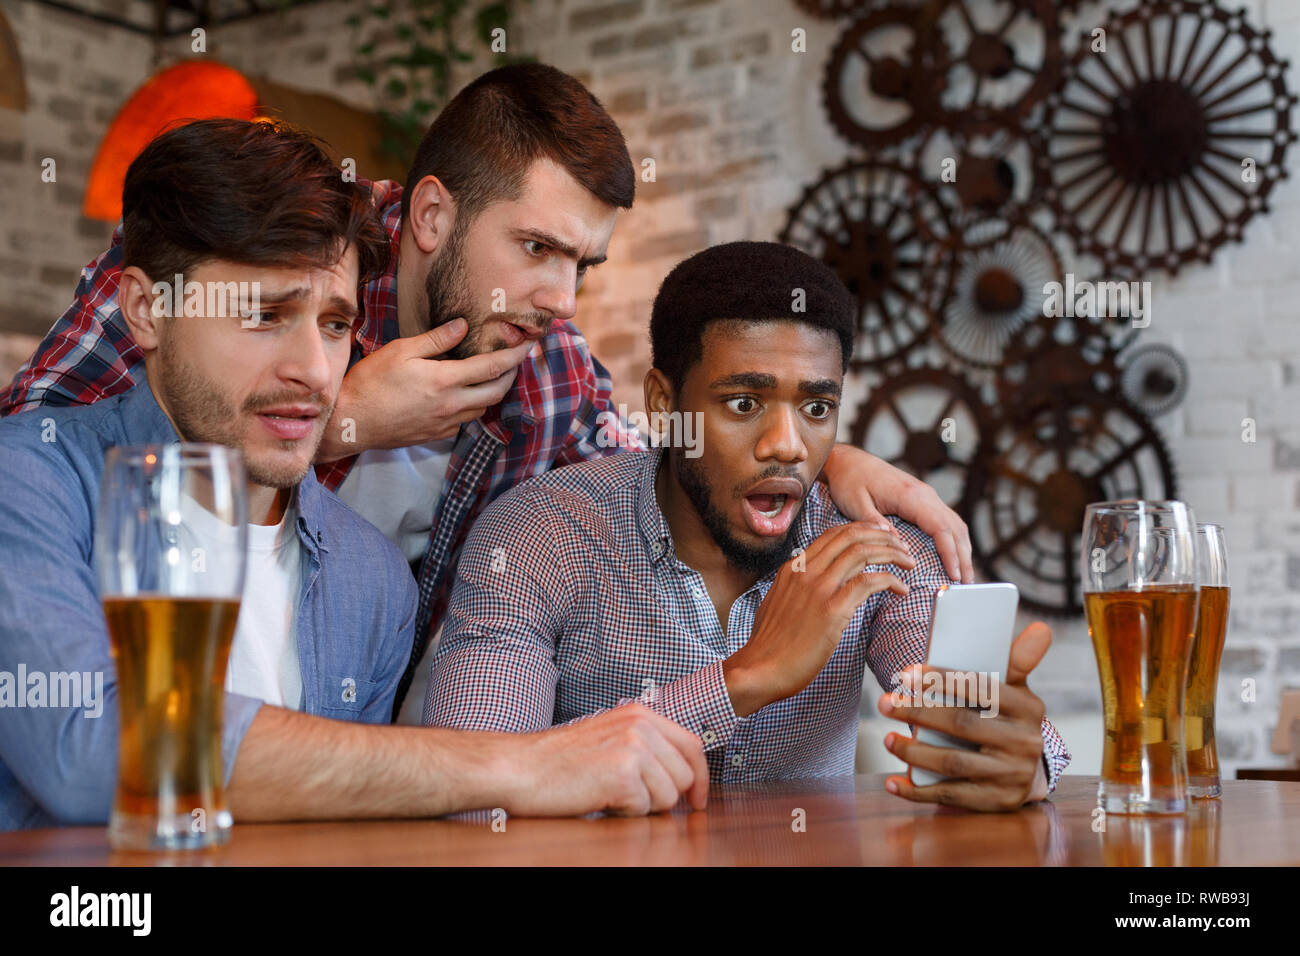 Friends watching football on smartphone in bar Stock Photo